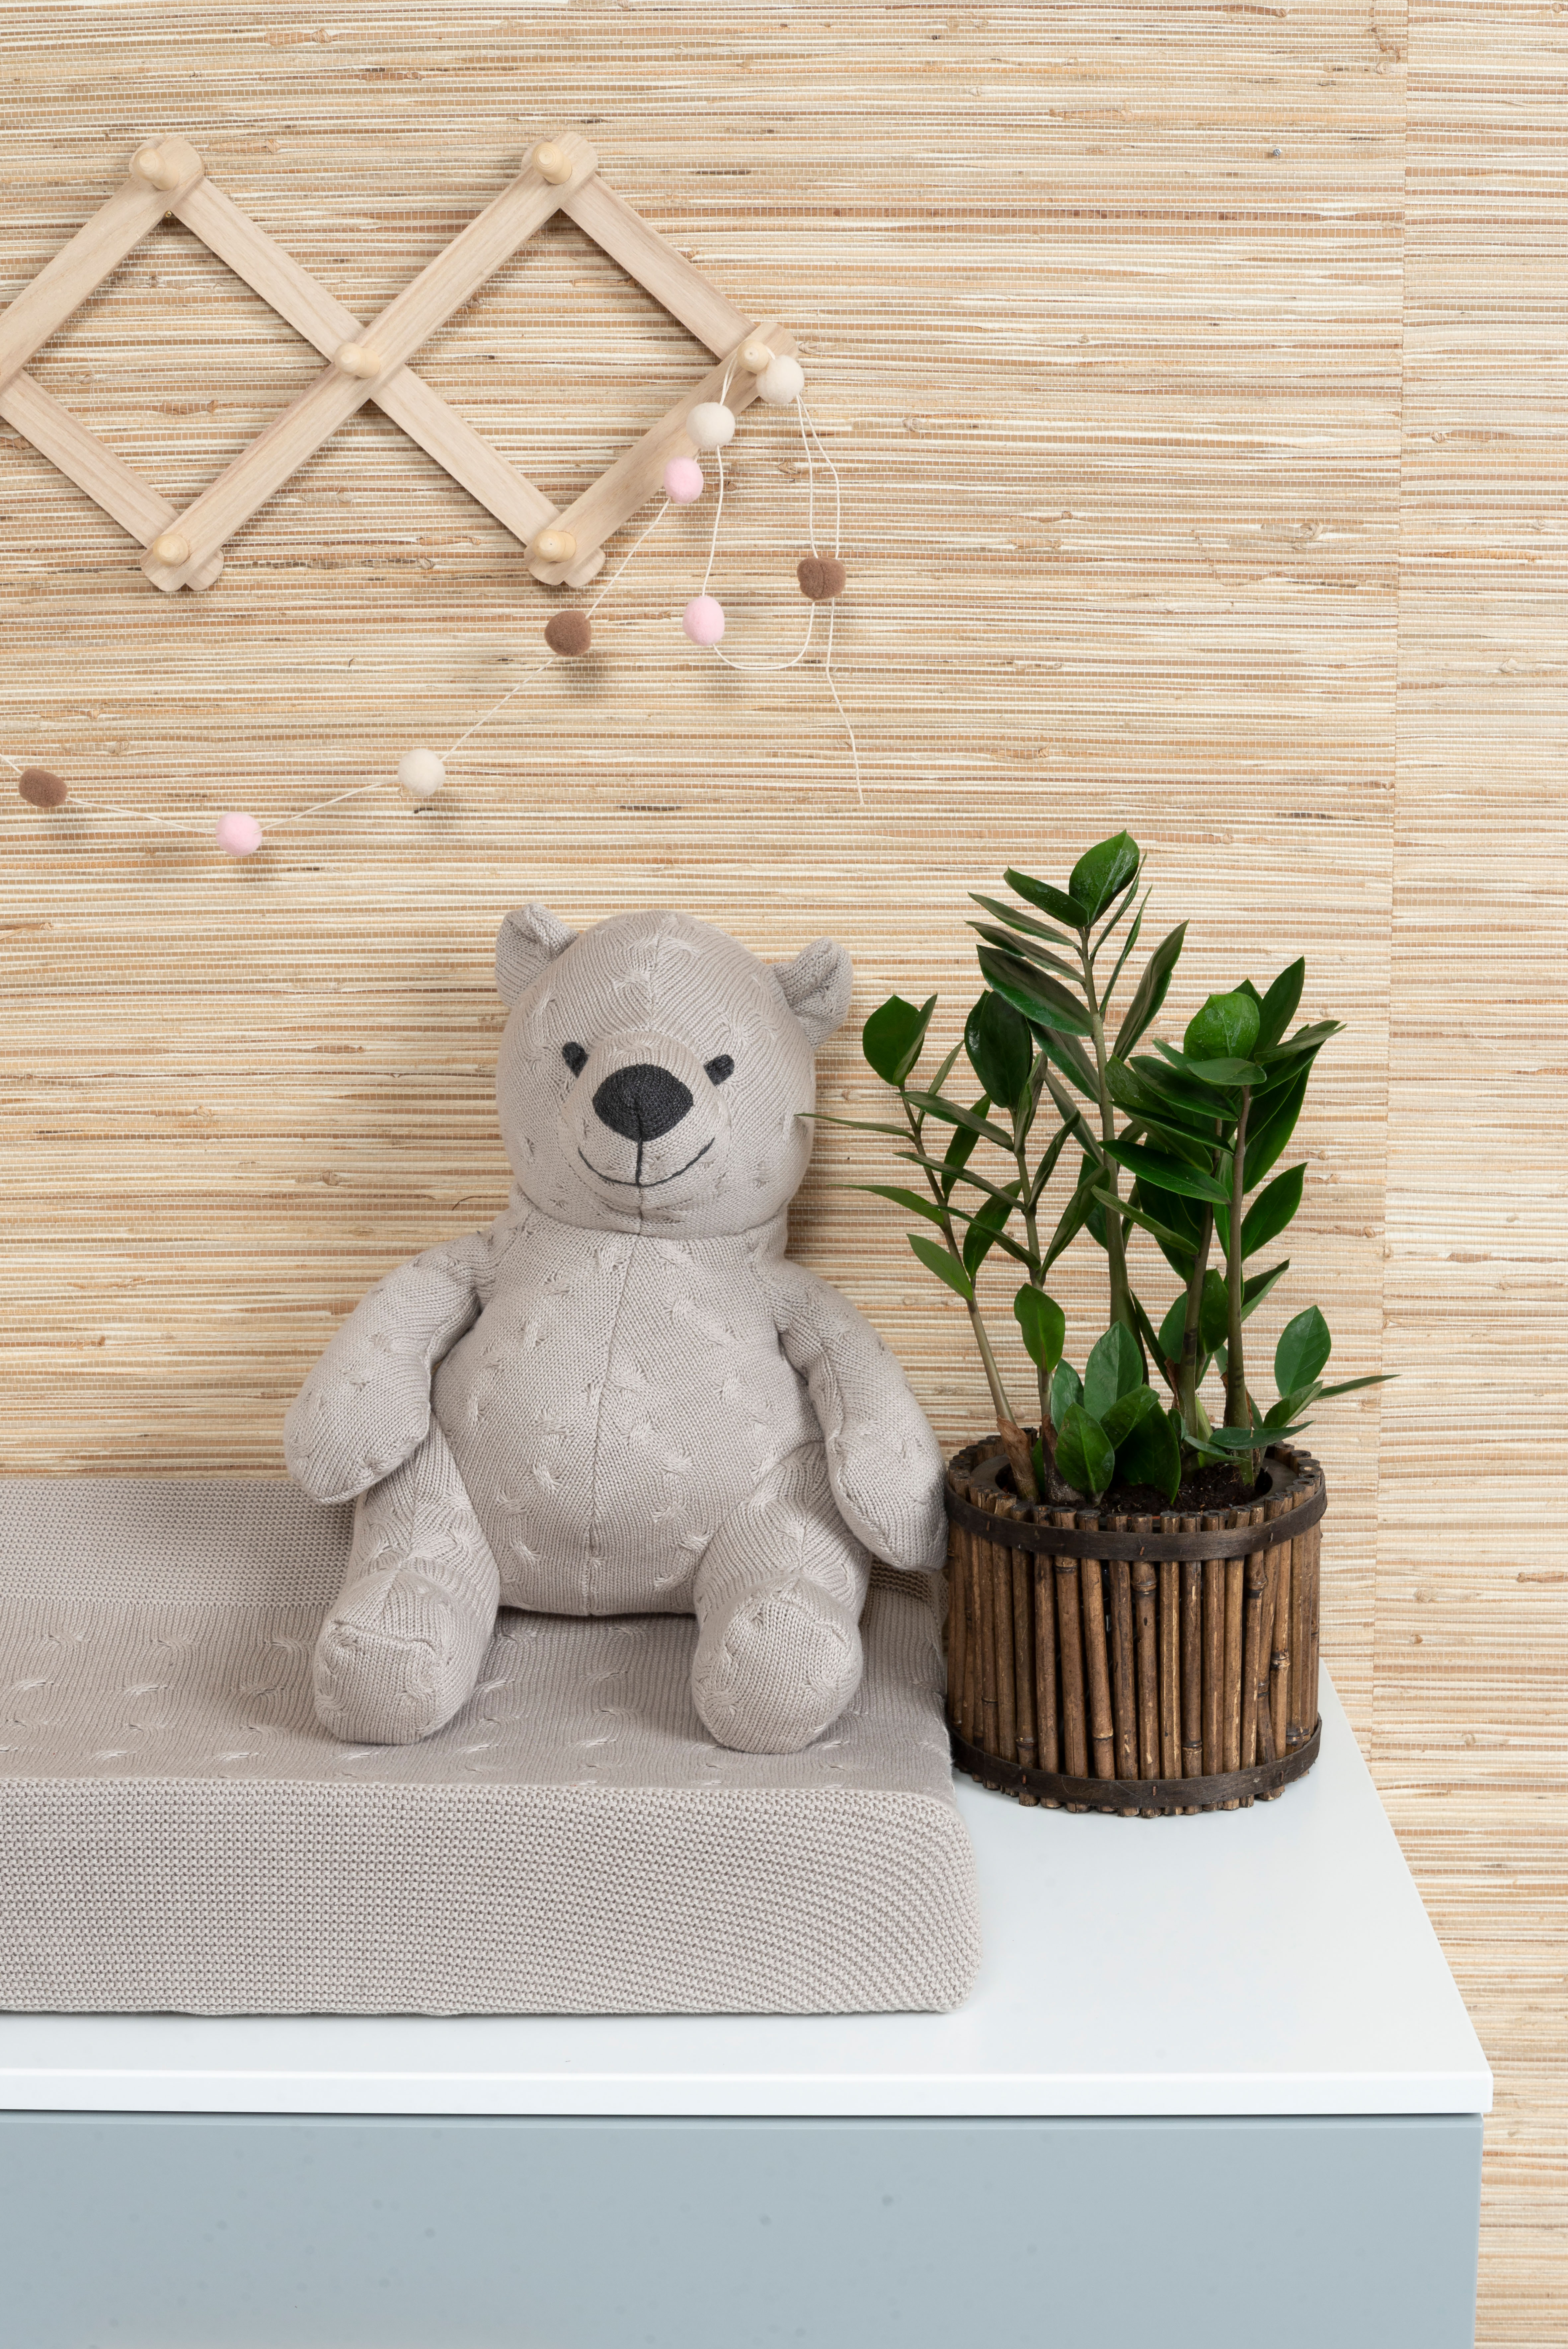 Stuffed bear Cable anthracite - 35 cm